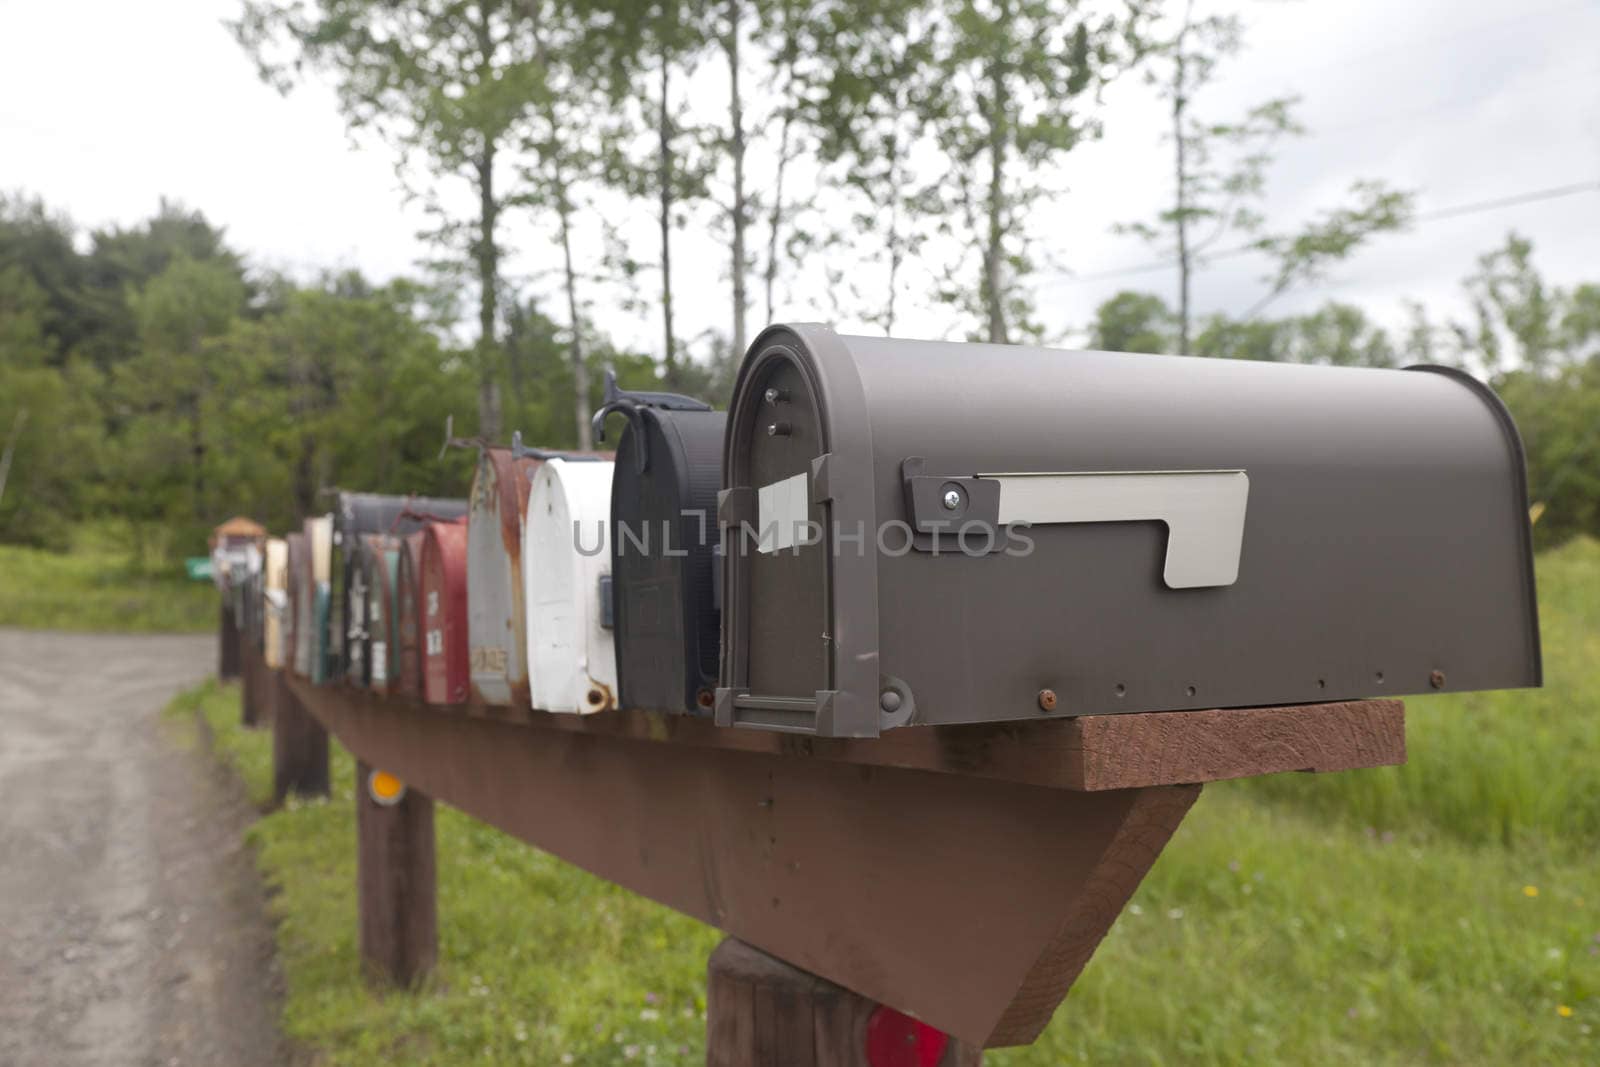 Rural Mailboxes by mothy20